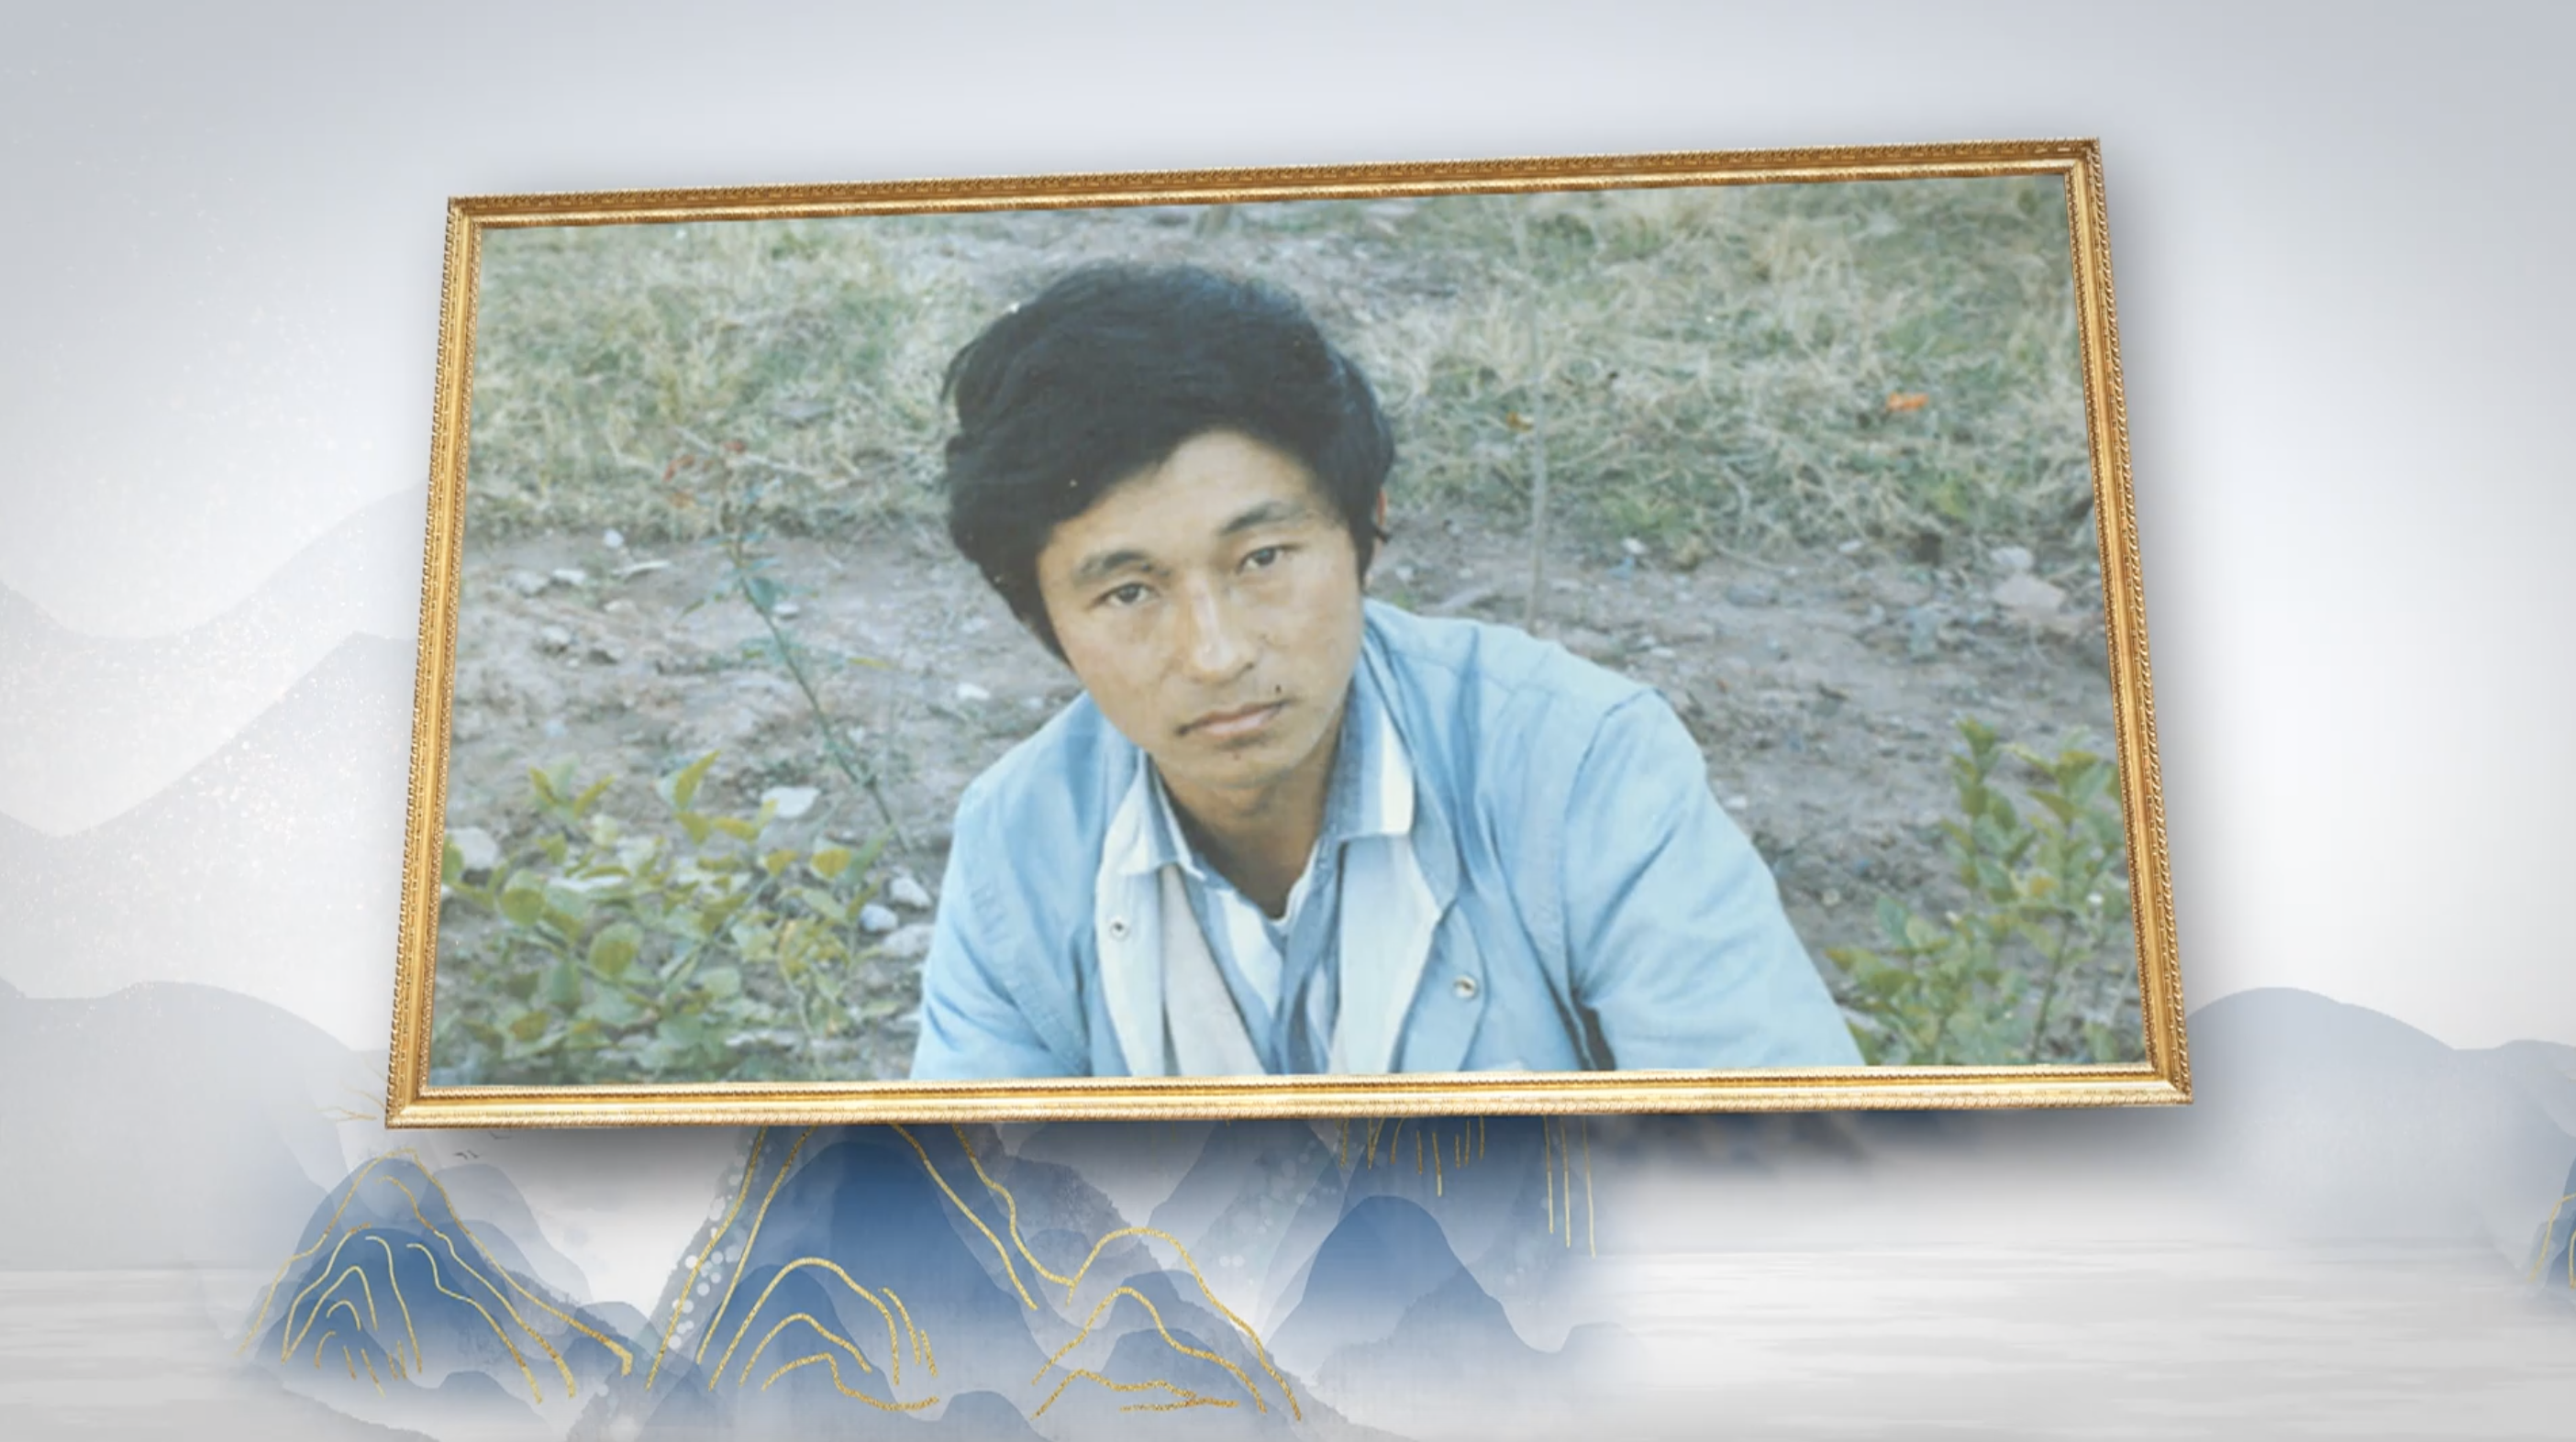 Contemporary Chinese writer Alai in his youth. /CGTN